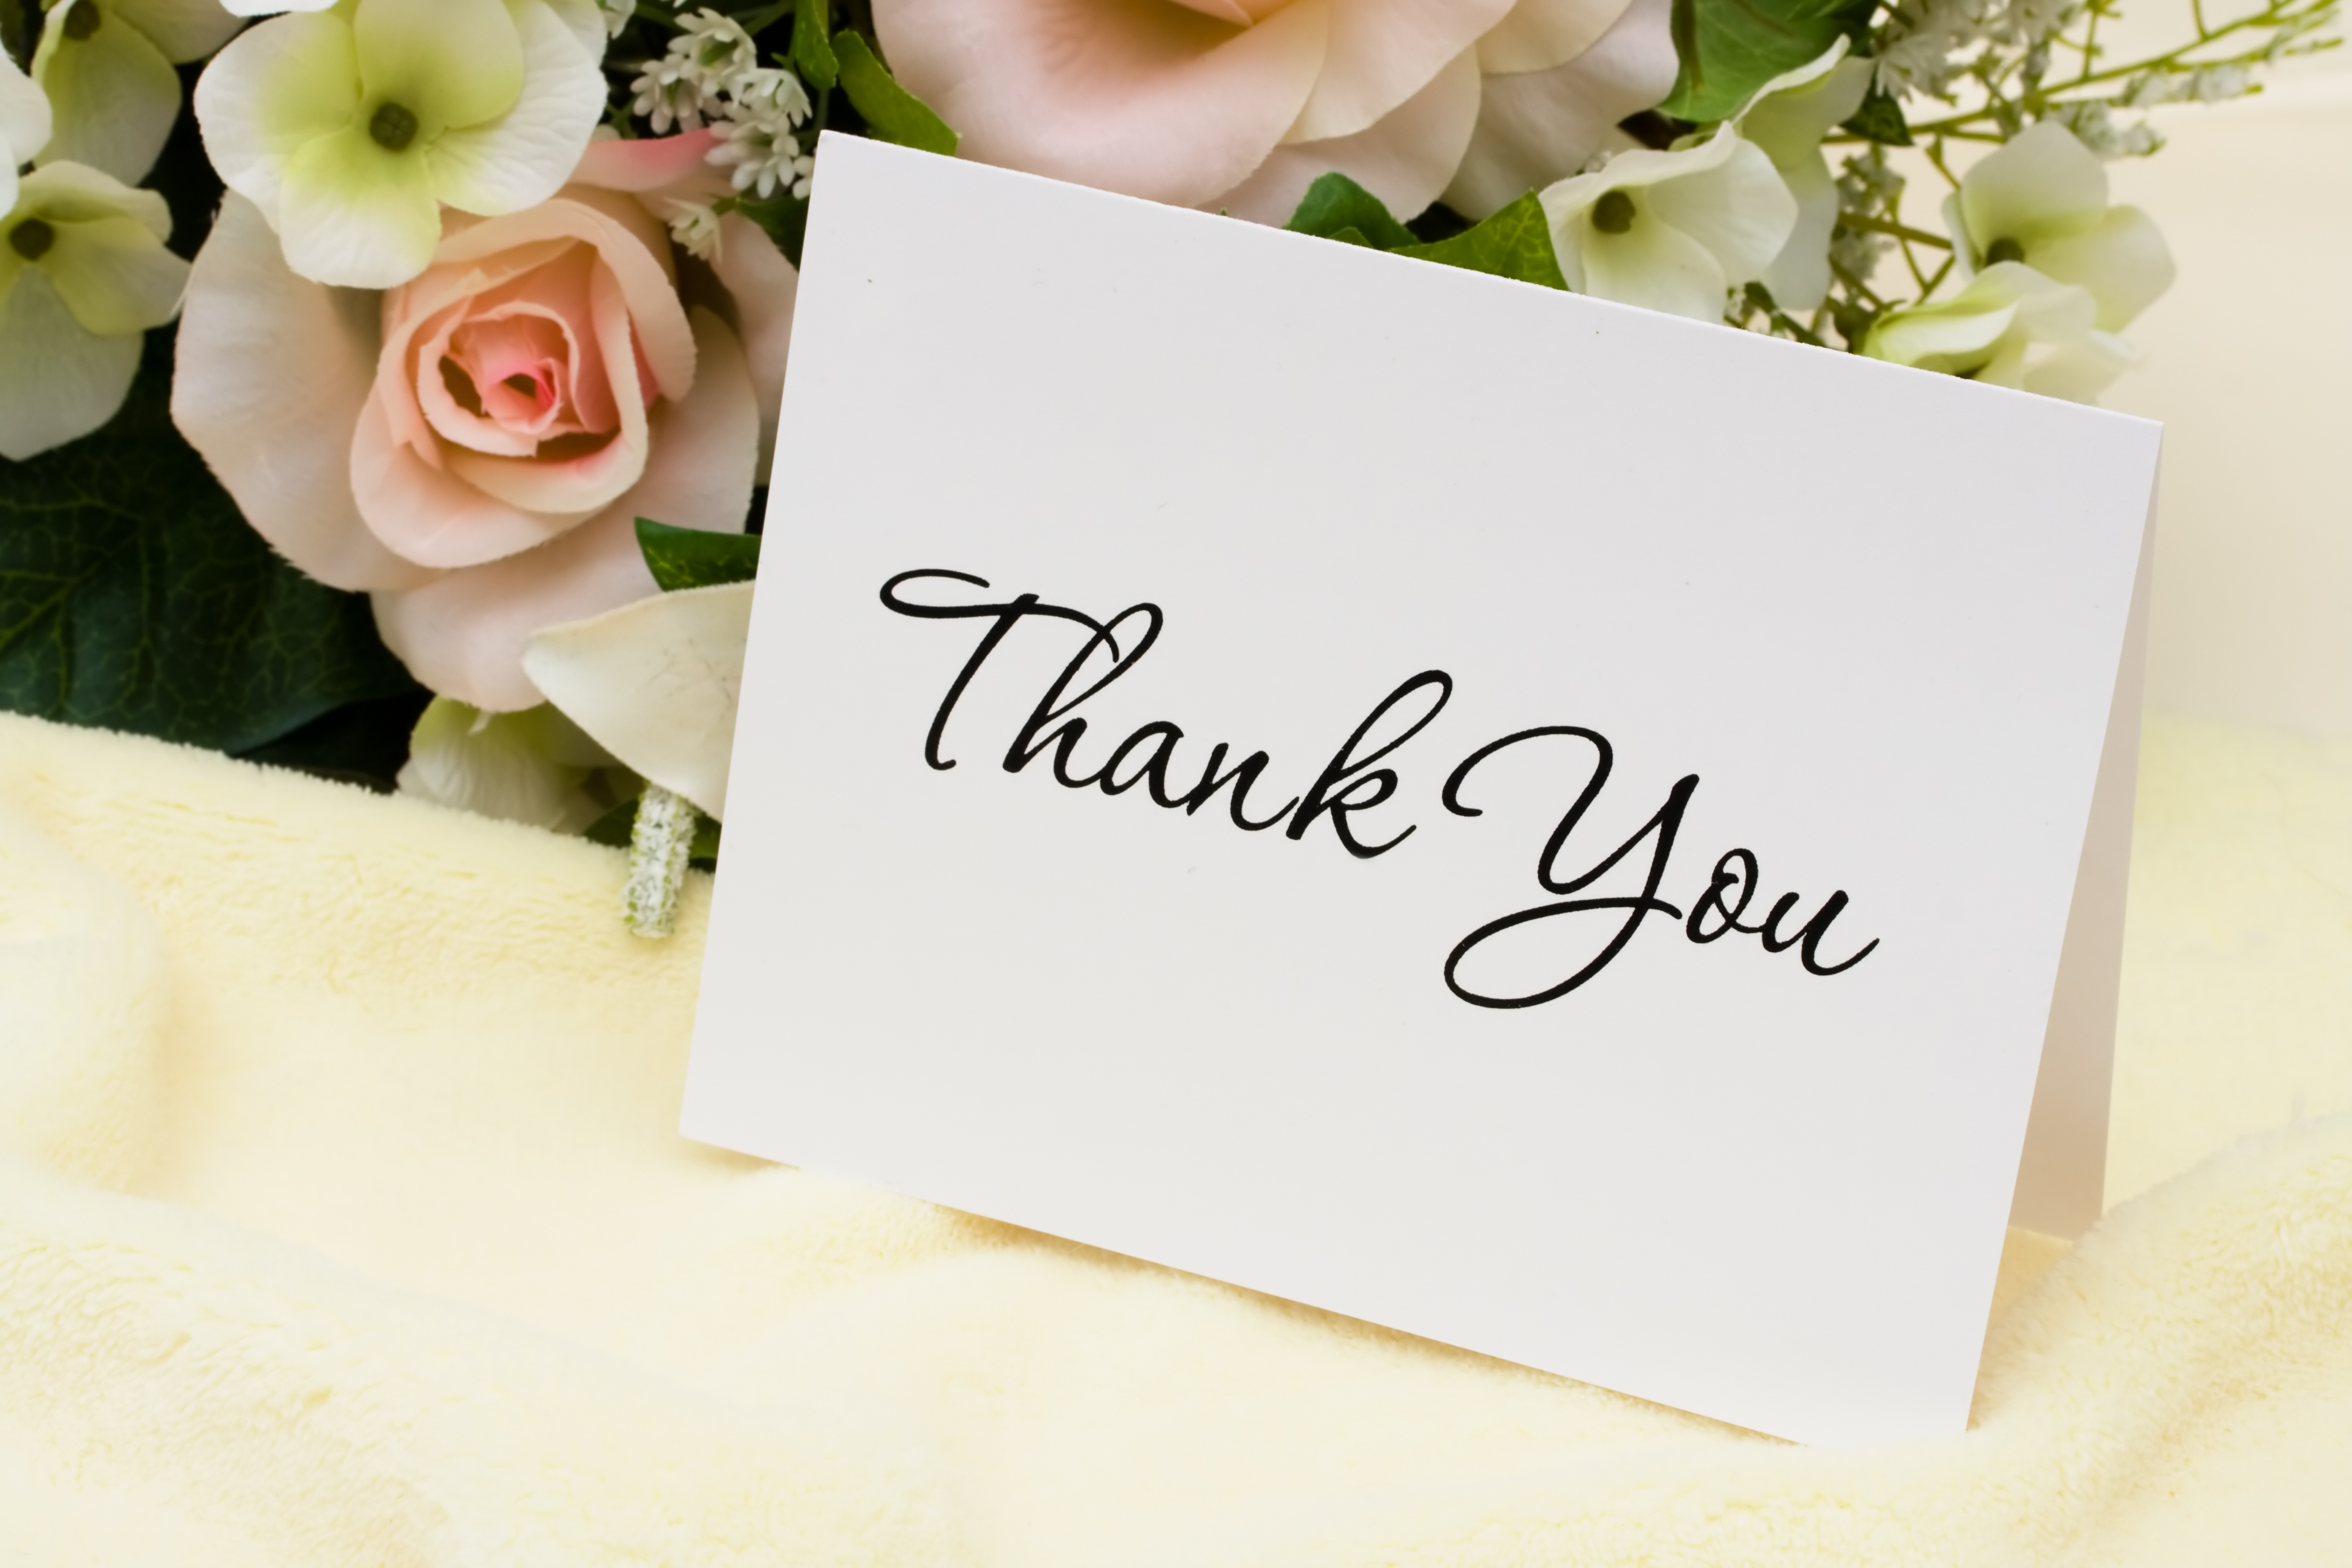 A bouquet of flowers with a thank you card thank you card